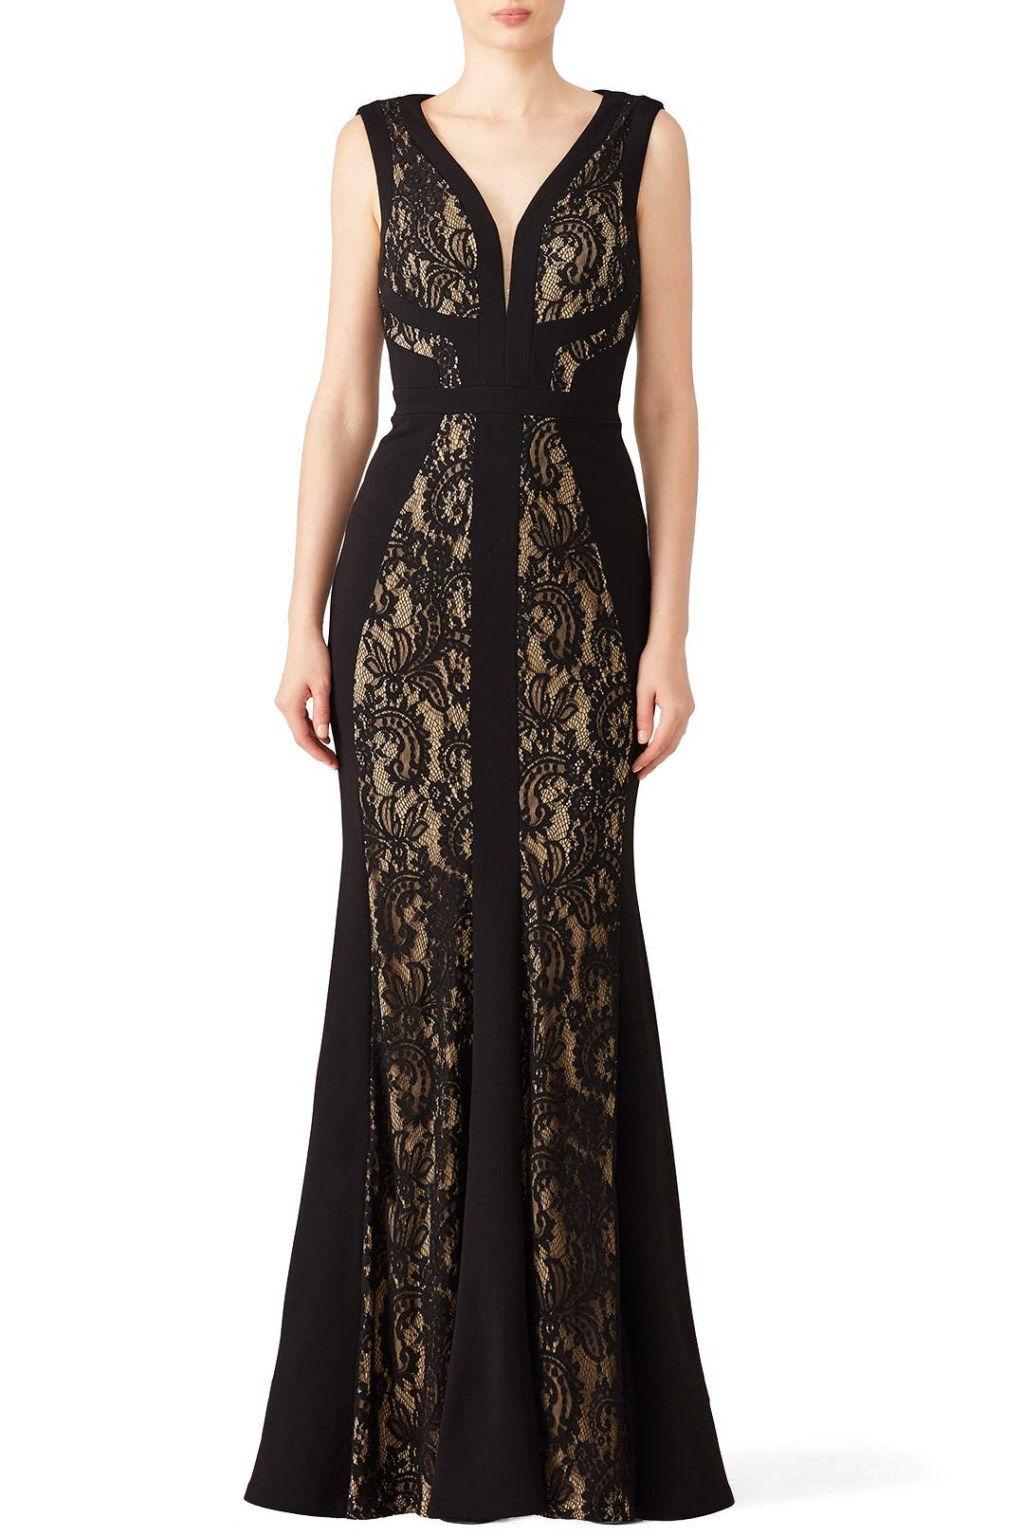 Picture of: Black & Nude Lace Gown by LM Collection for $  Rent the Runway